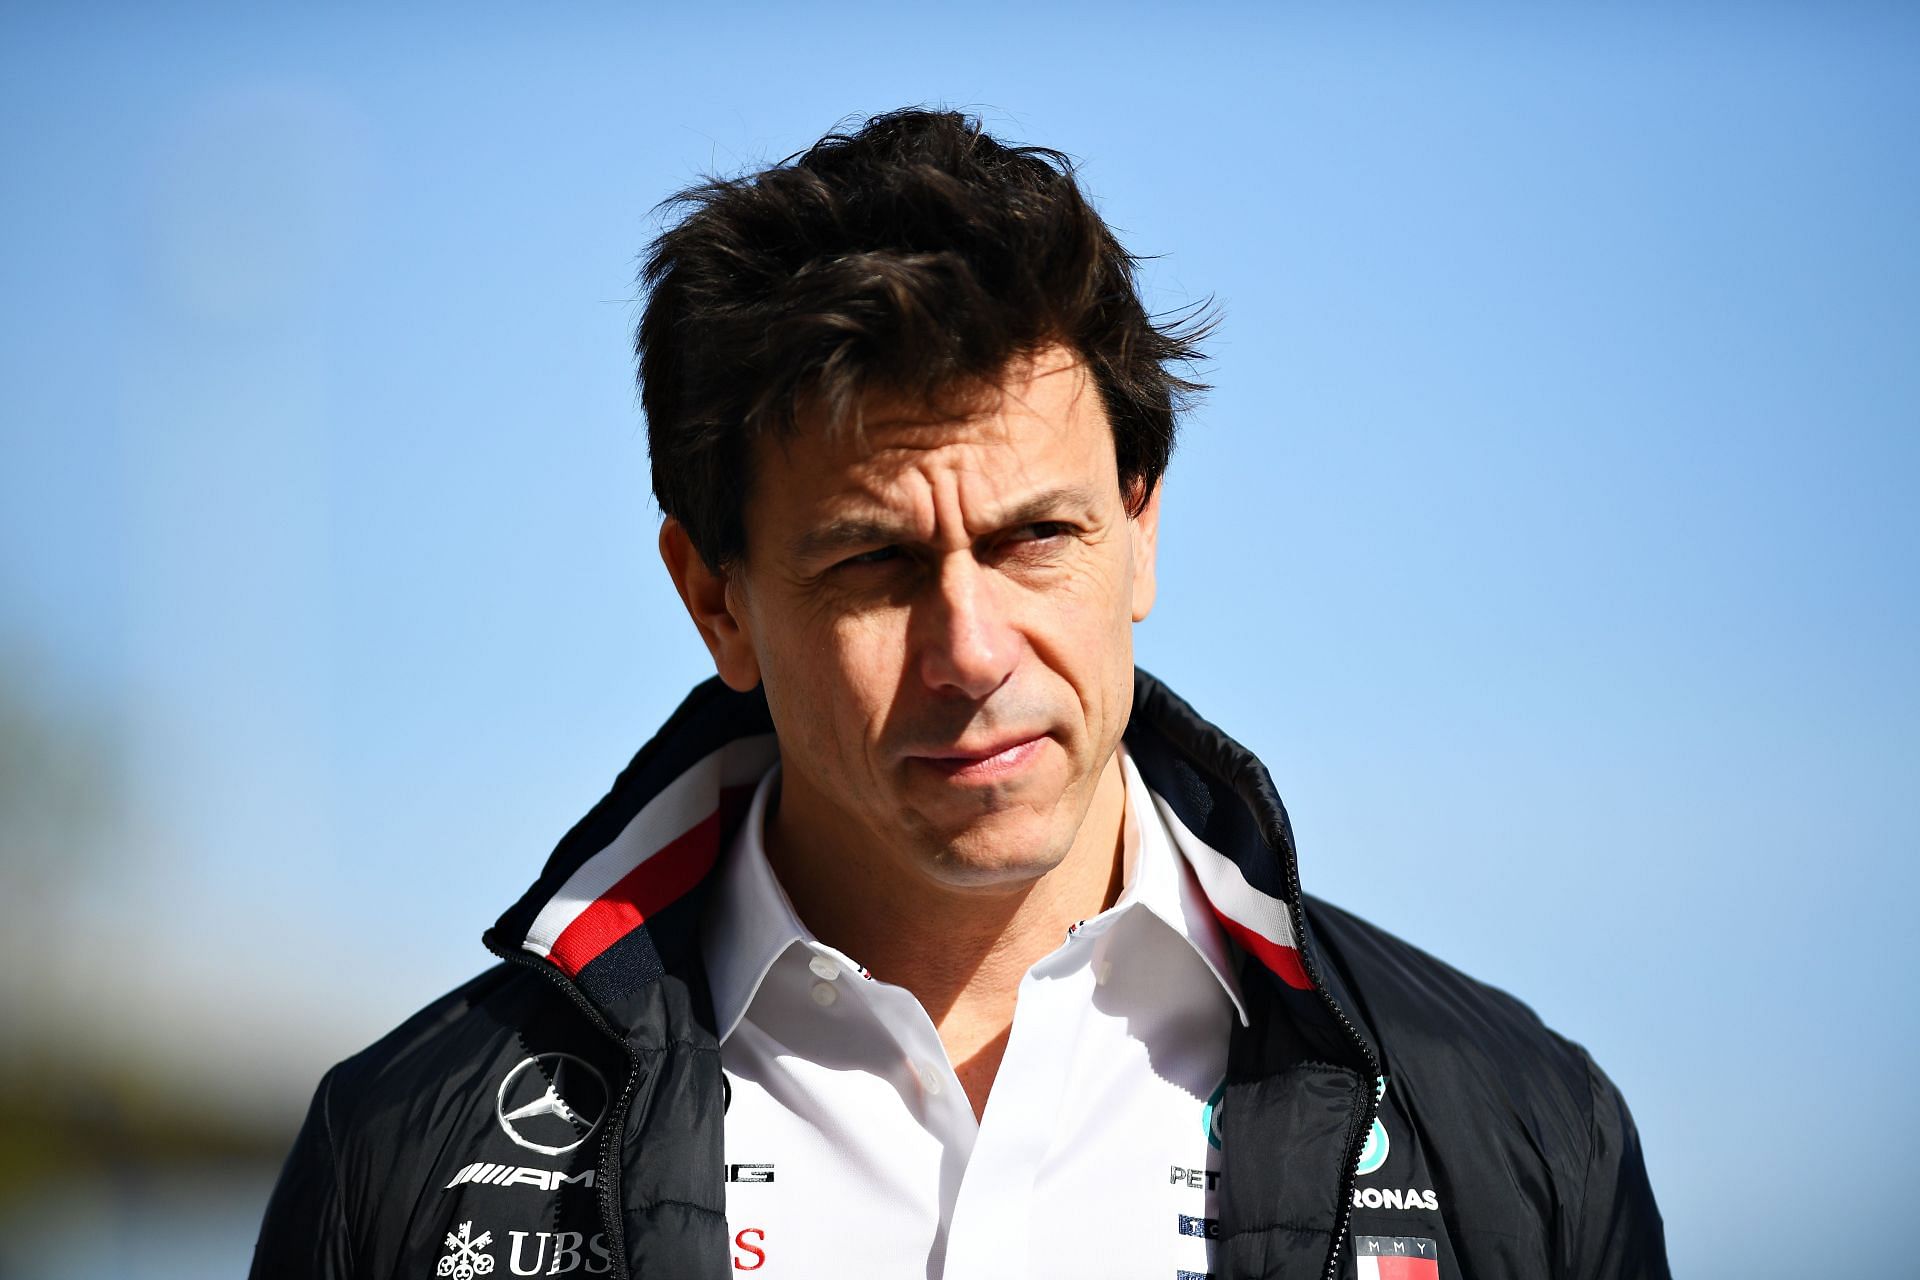 Mercedes GP Executive Director Toto Wolff walks in the Paddock in Austin, Texas. (Photo by Clive Mason/Getty Images)